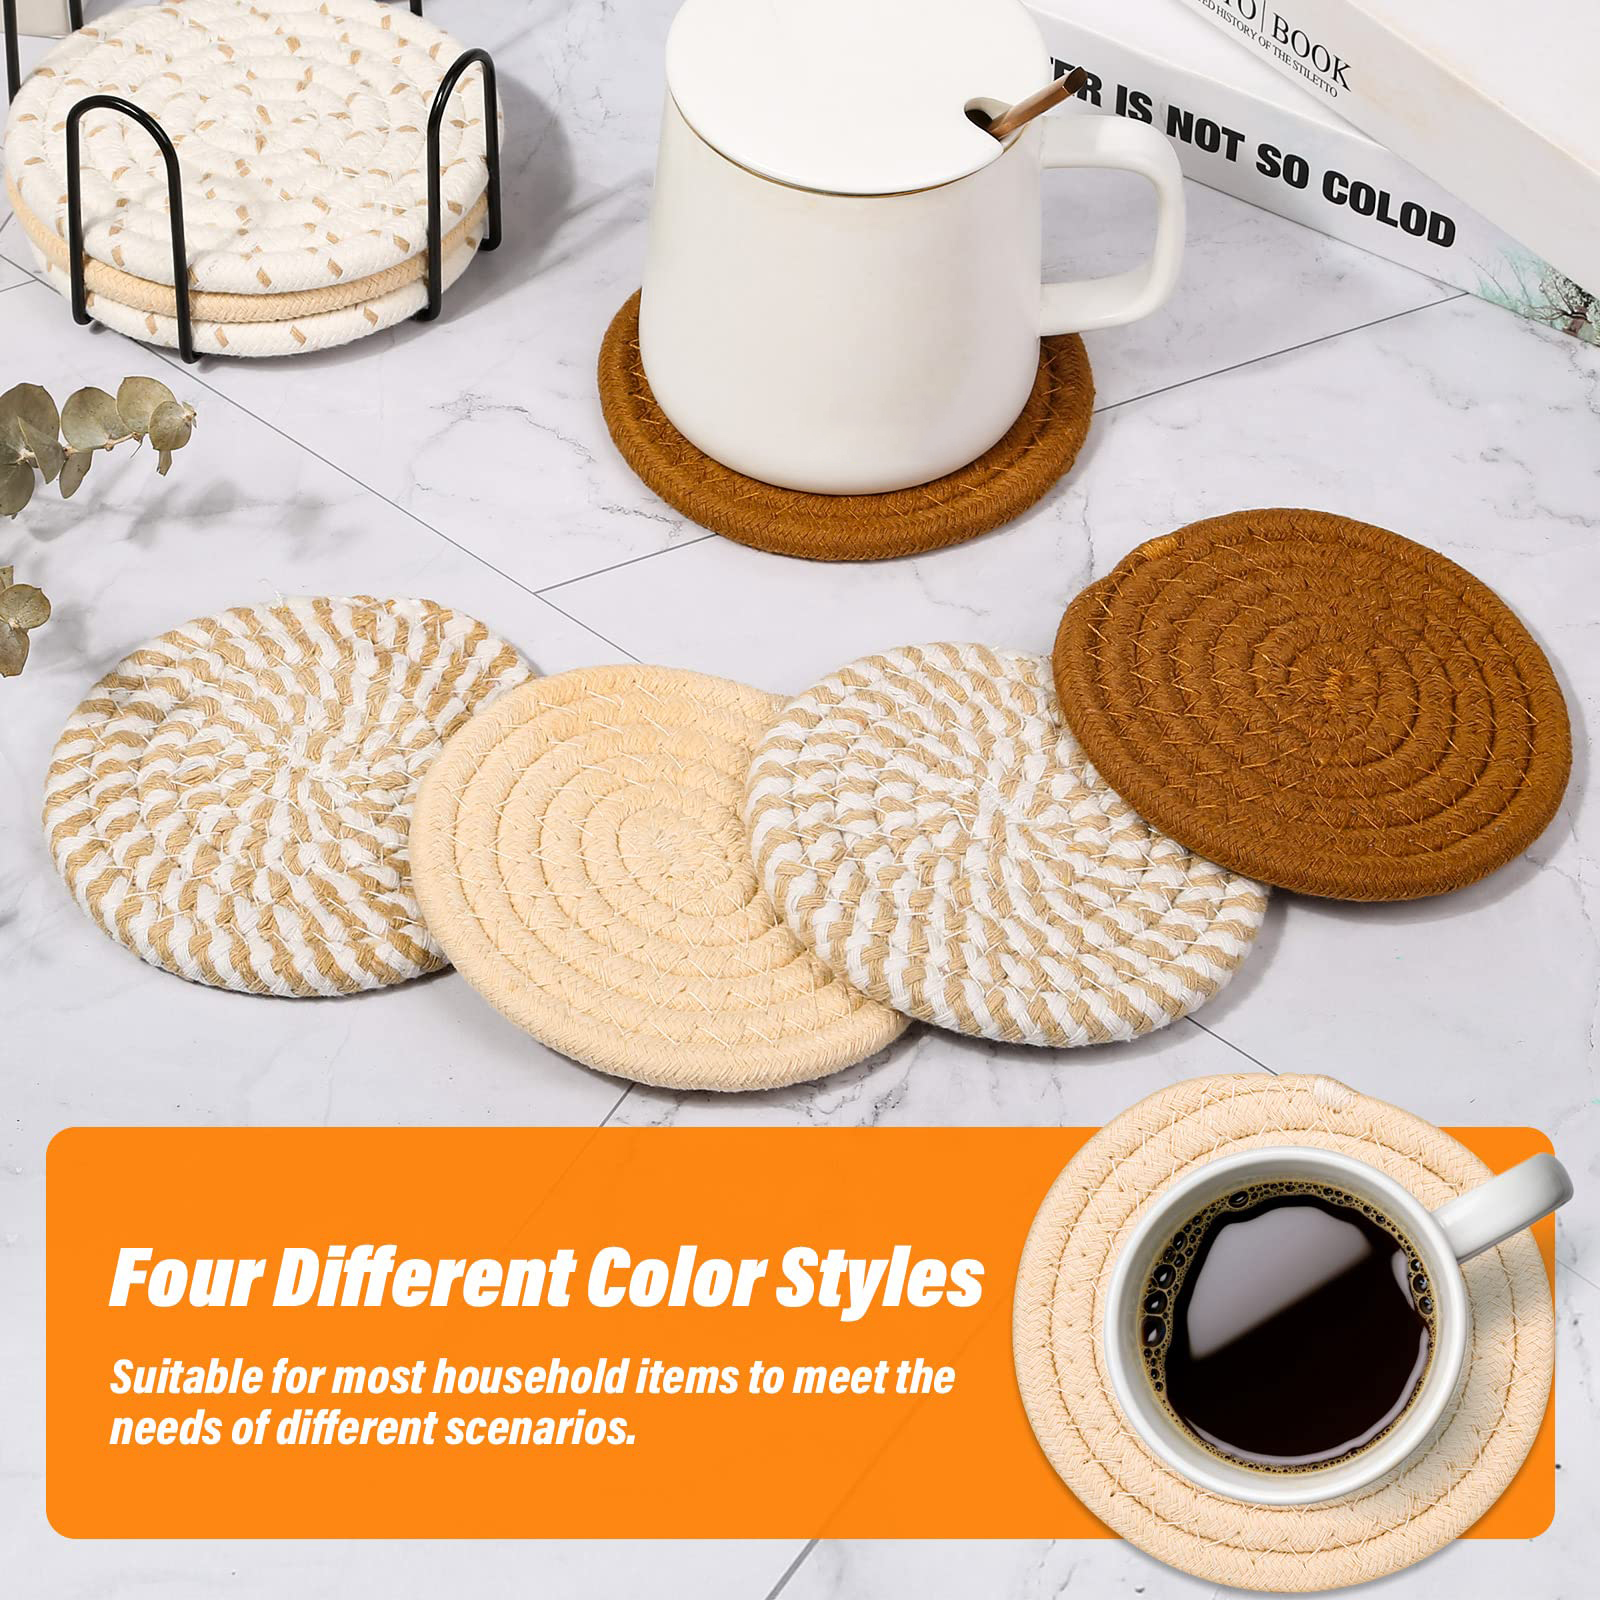 4 Inch Absorbent Wood Drink Coasters Round Table Protection Cup Mat (4  piece)